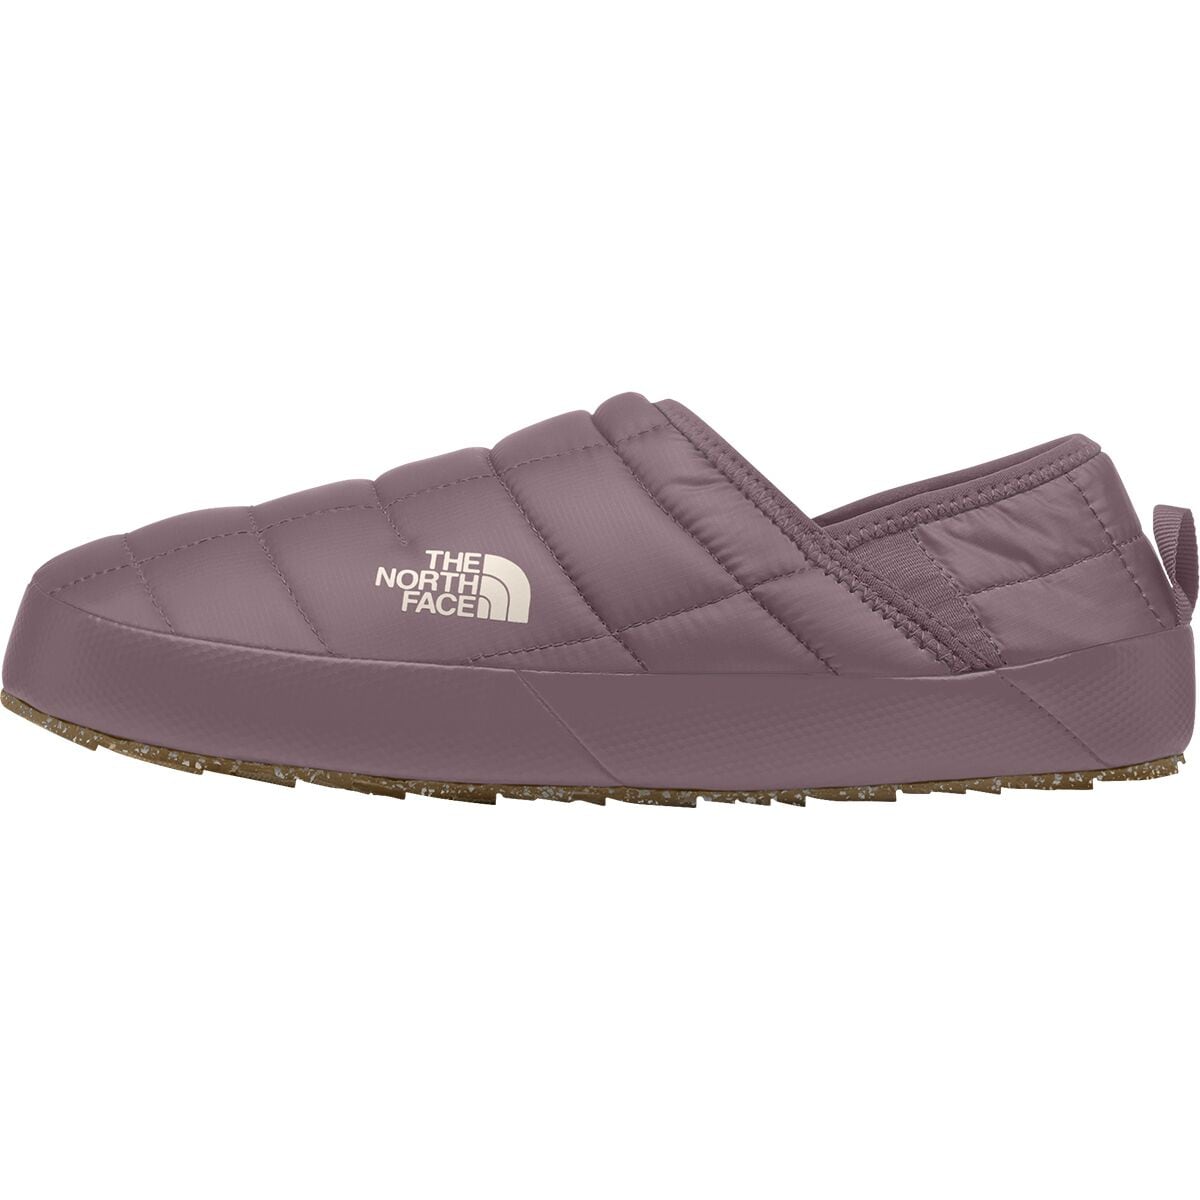 The North Face Thermoball Traction Mule V Shoe - Women's